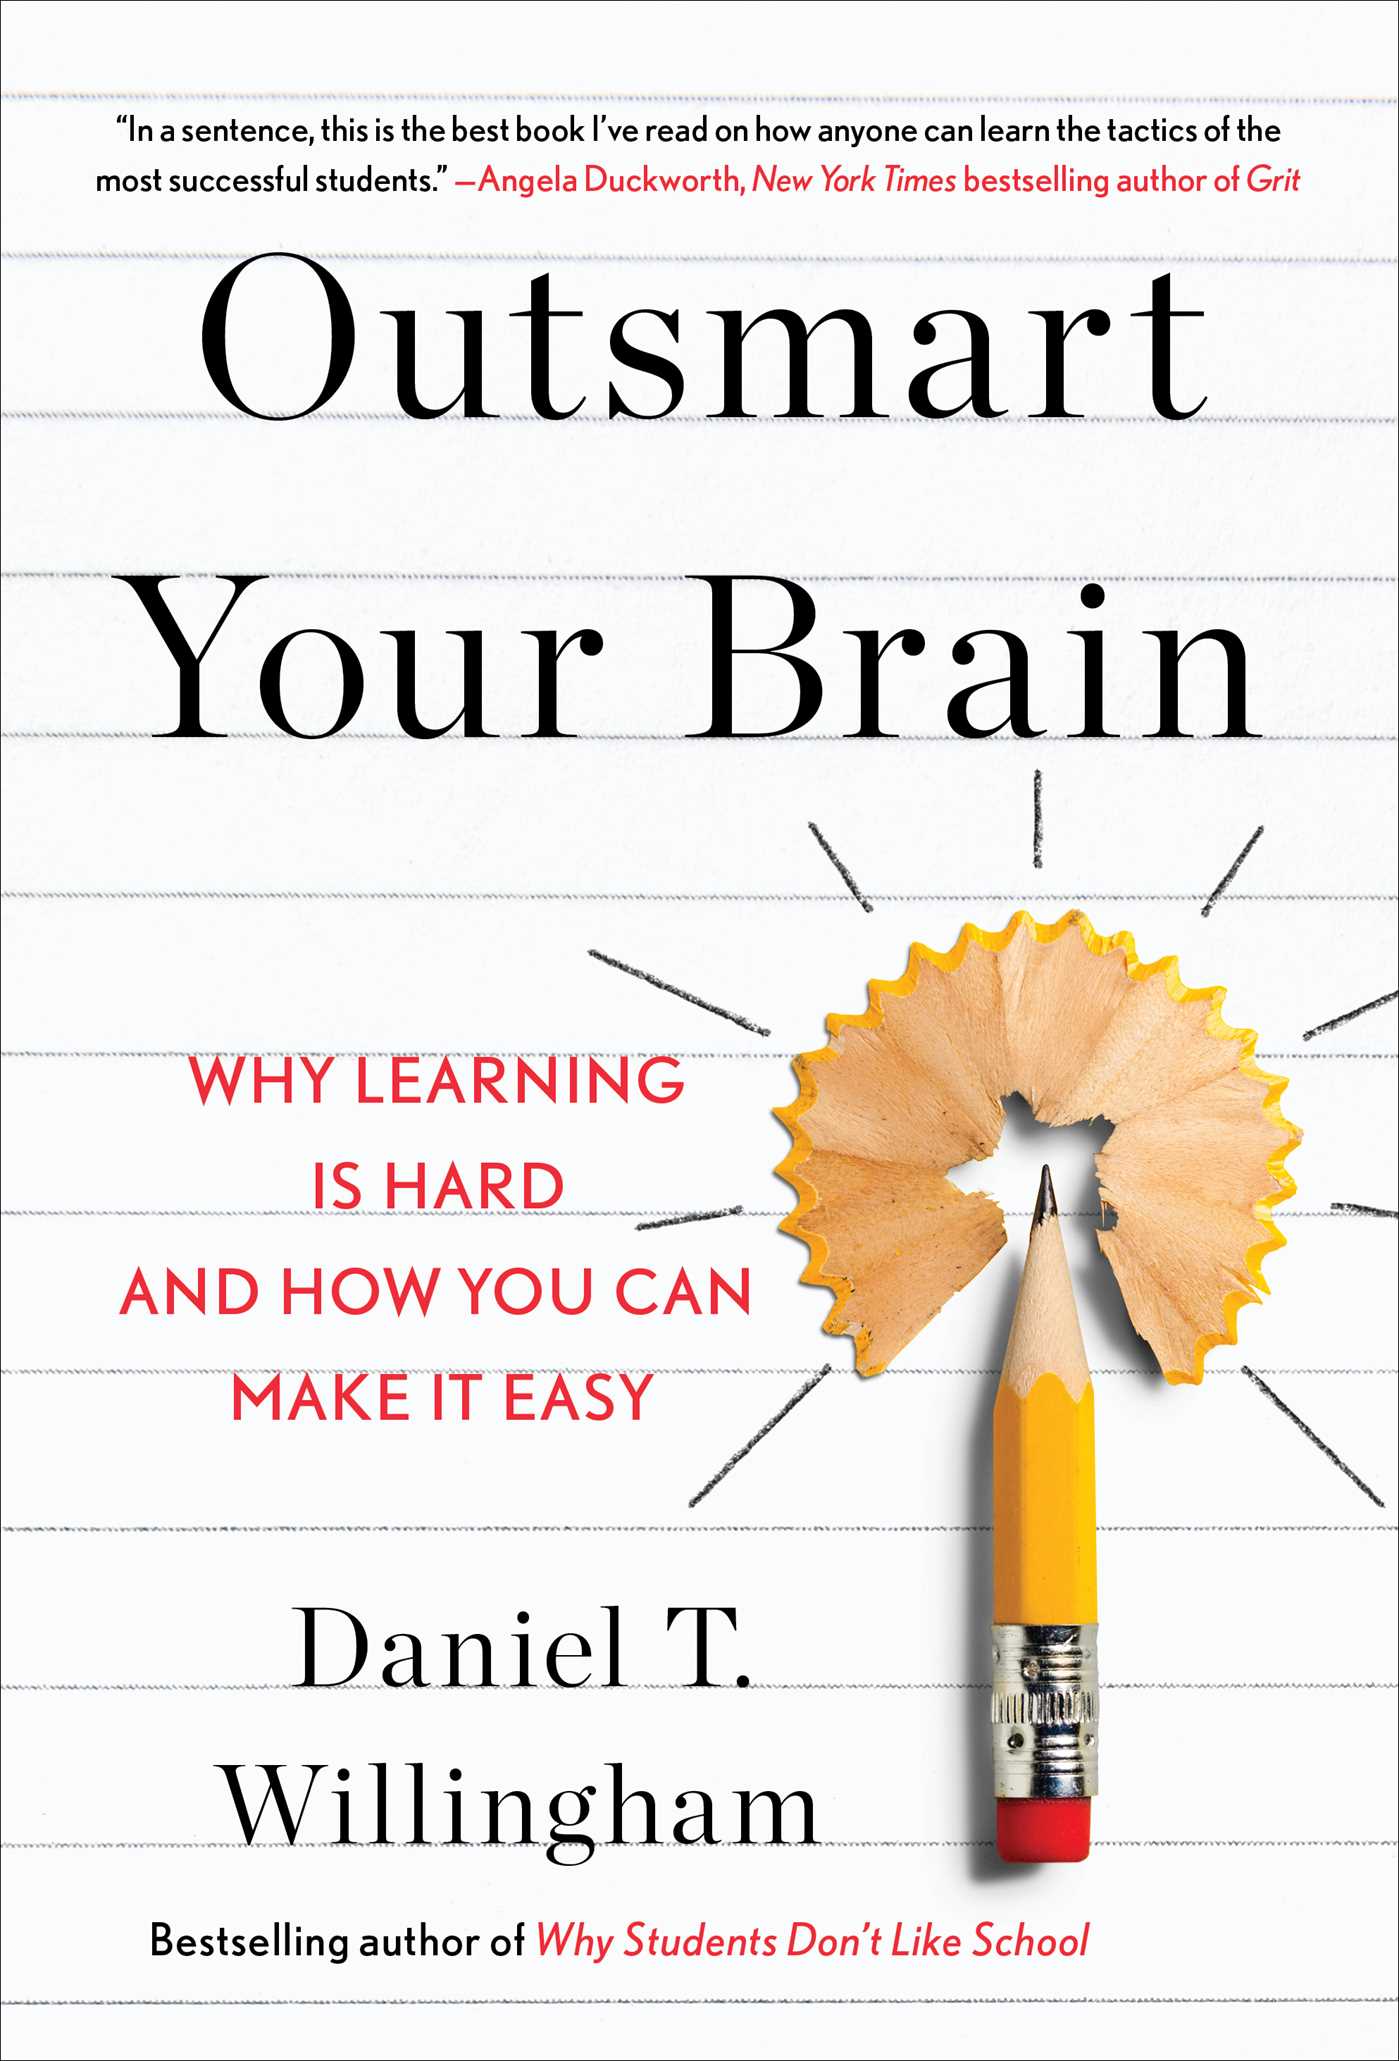 The cover of Outsmart Your Brain